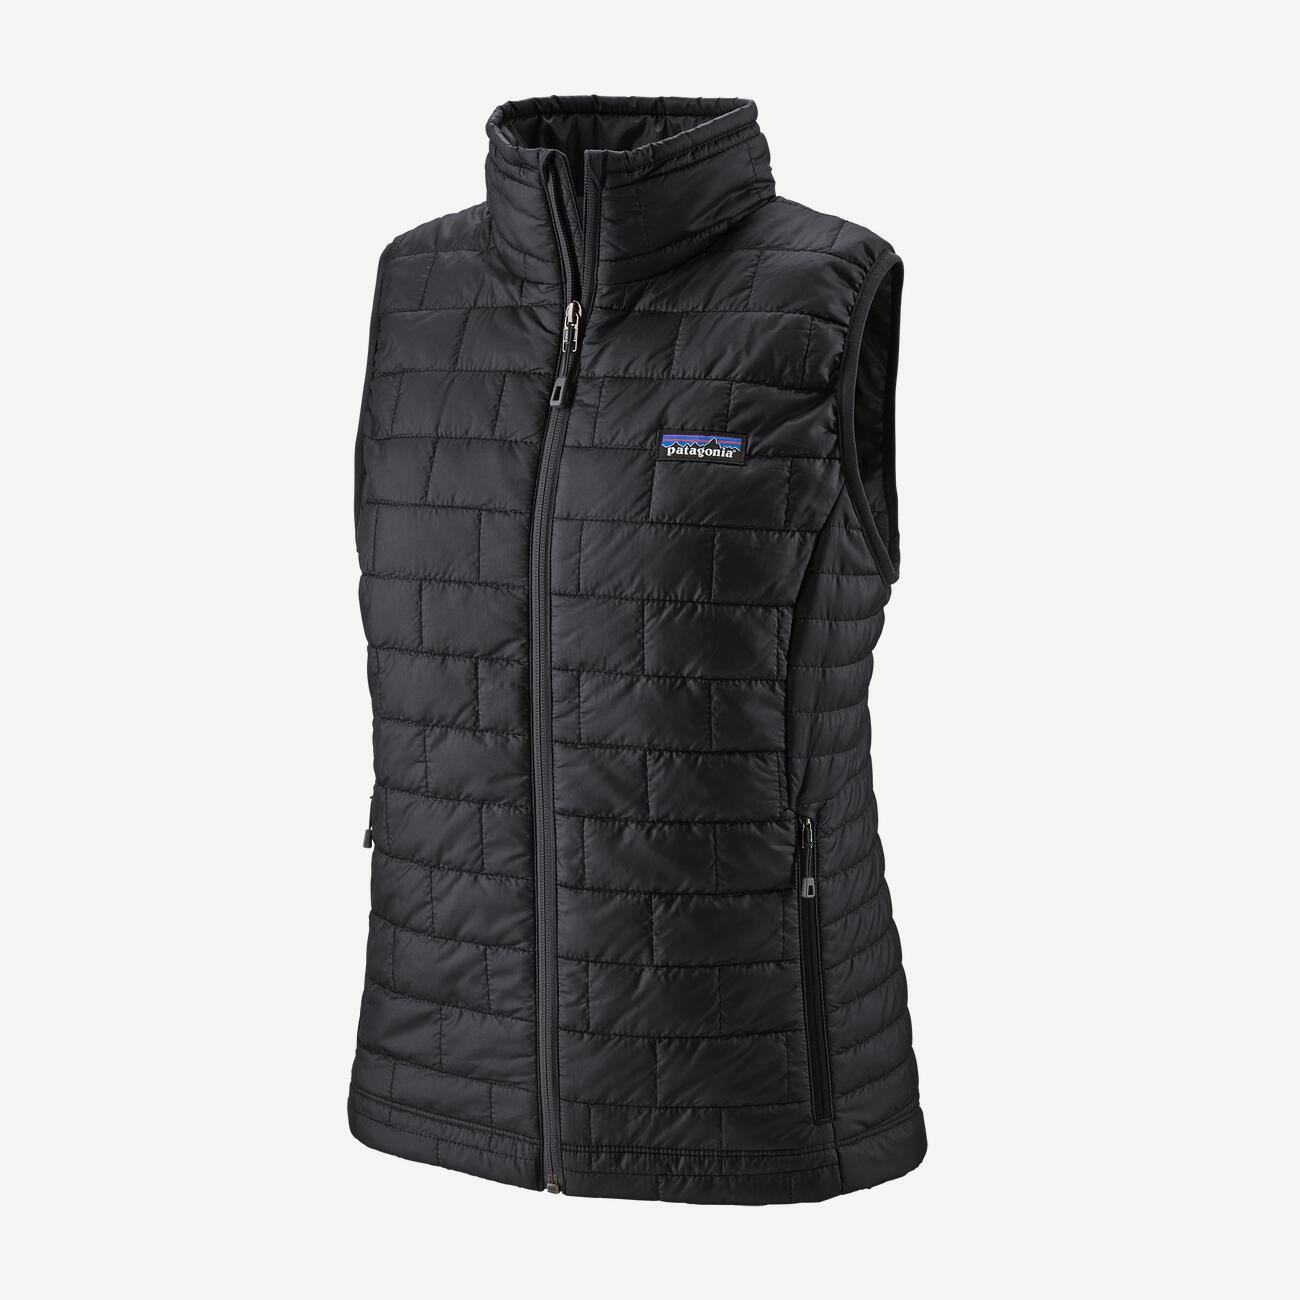 Patagonia Women's Nano Puff Vest-WOMENS CLOTHING-BLACK-XL-Kevin's Fine Outdoor Gear & Apparel